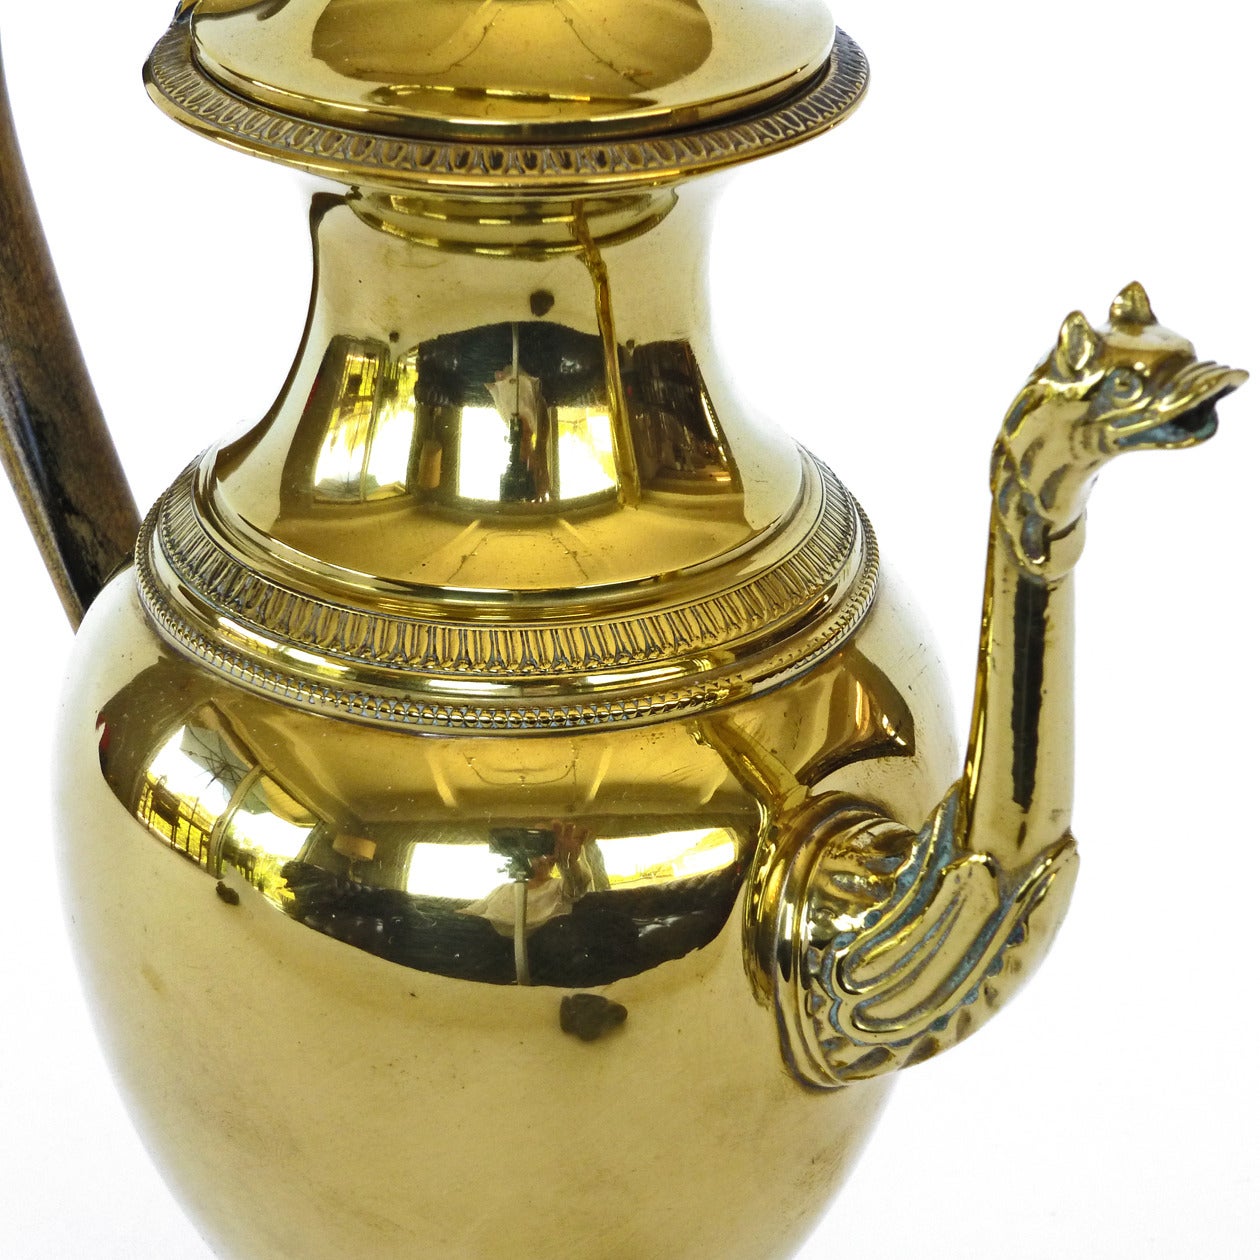 French brass coffee pot, circa 1865.

Measures: Width handle to spout 7